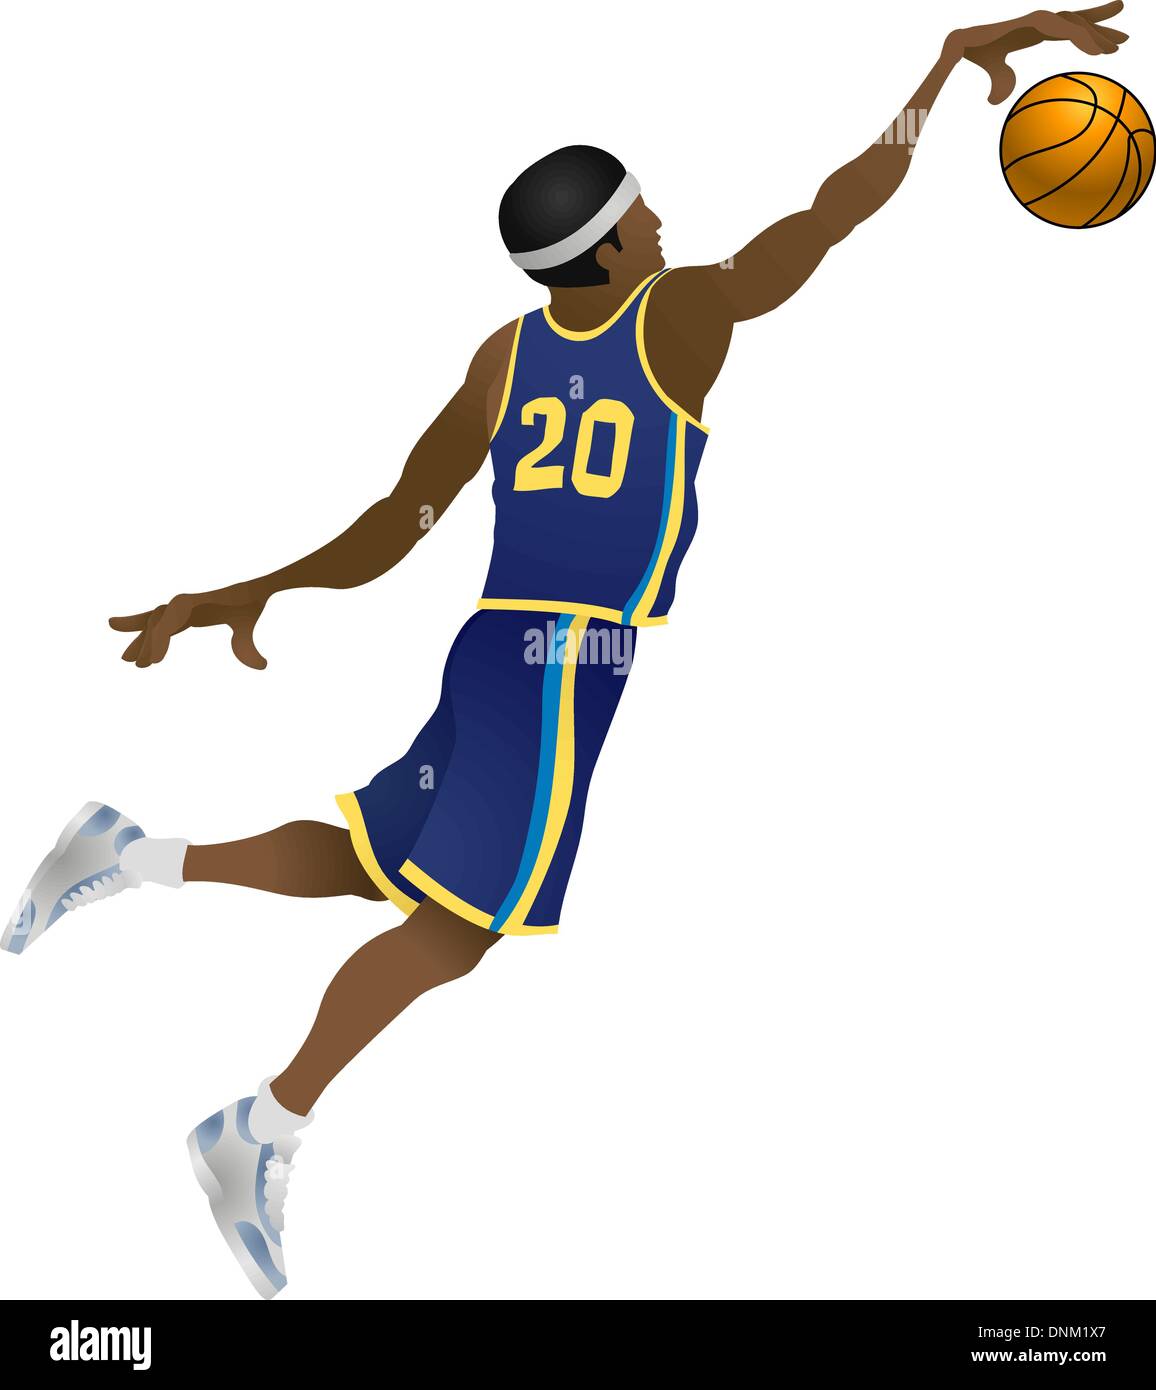 An illustration of Basketball player dunking a ball Stock Vector